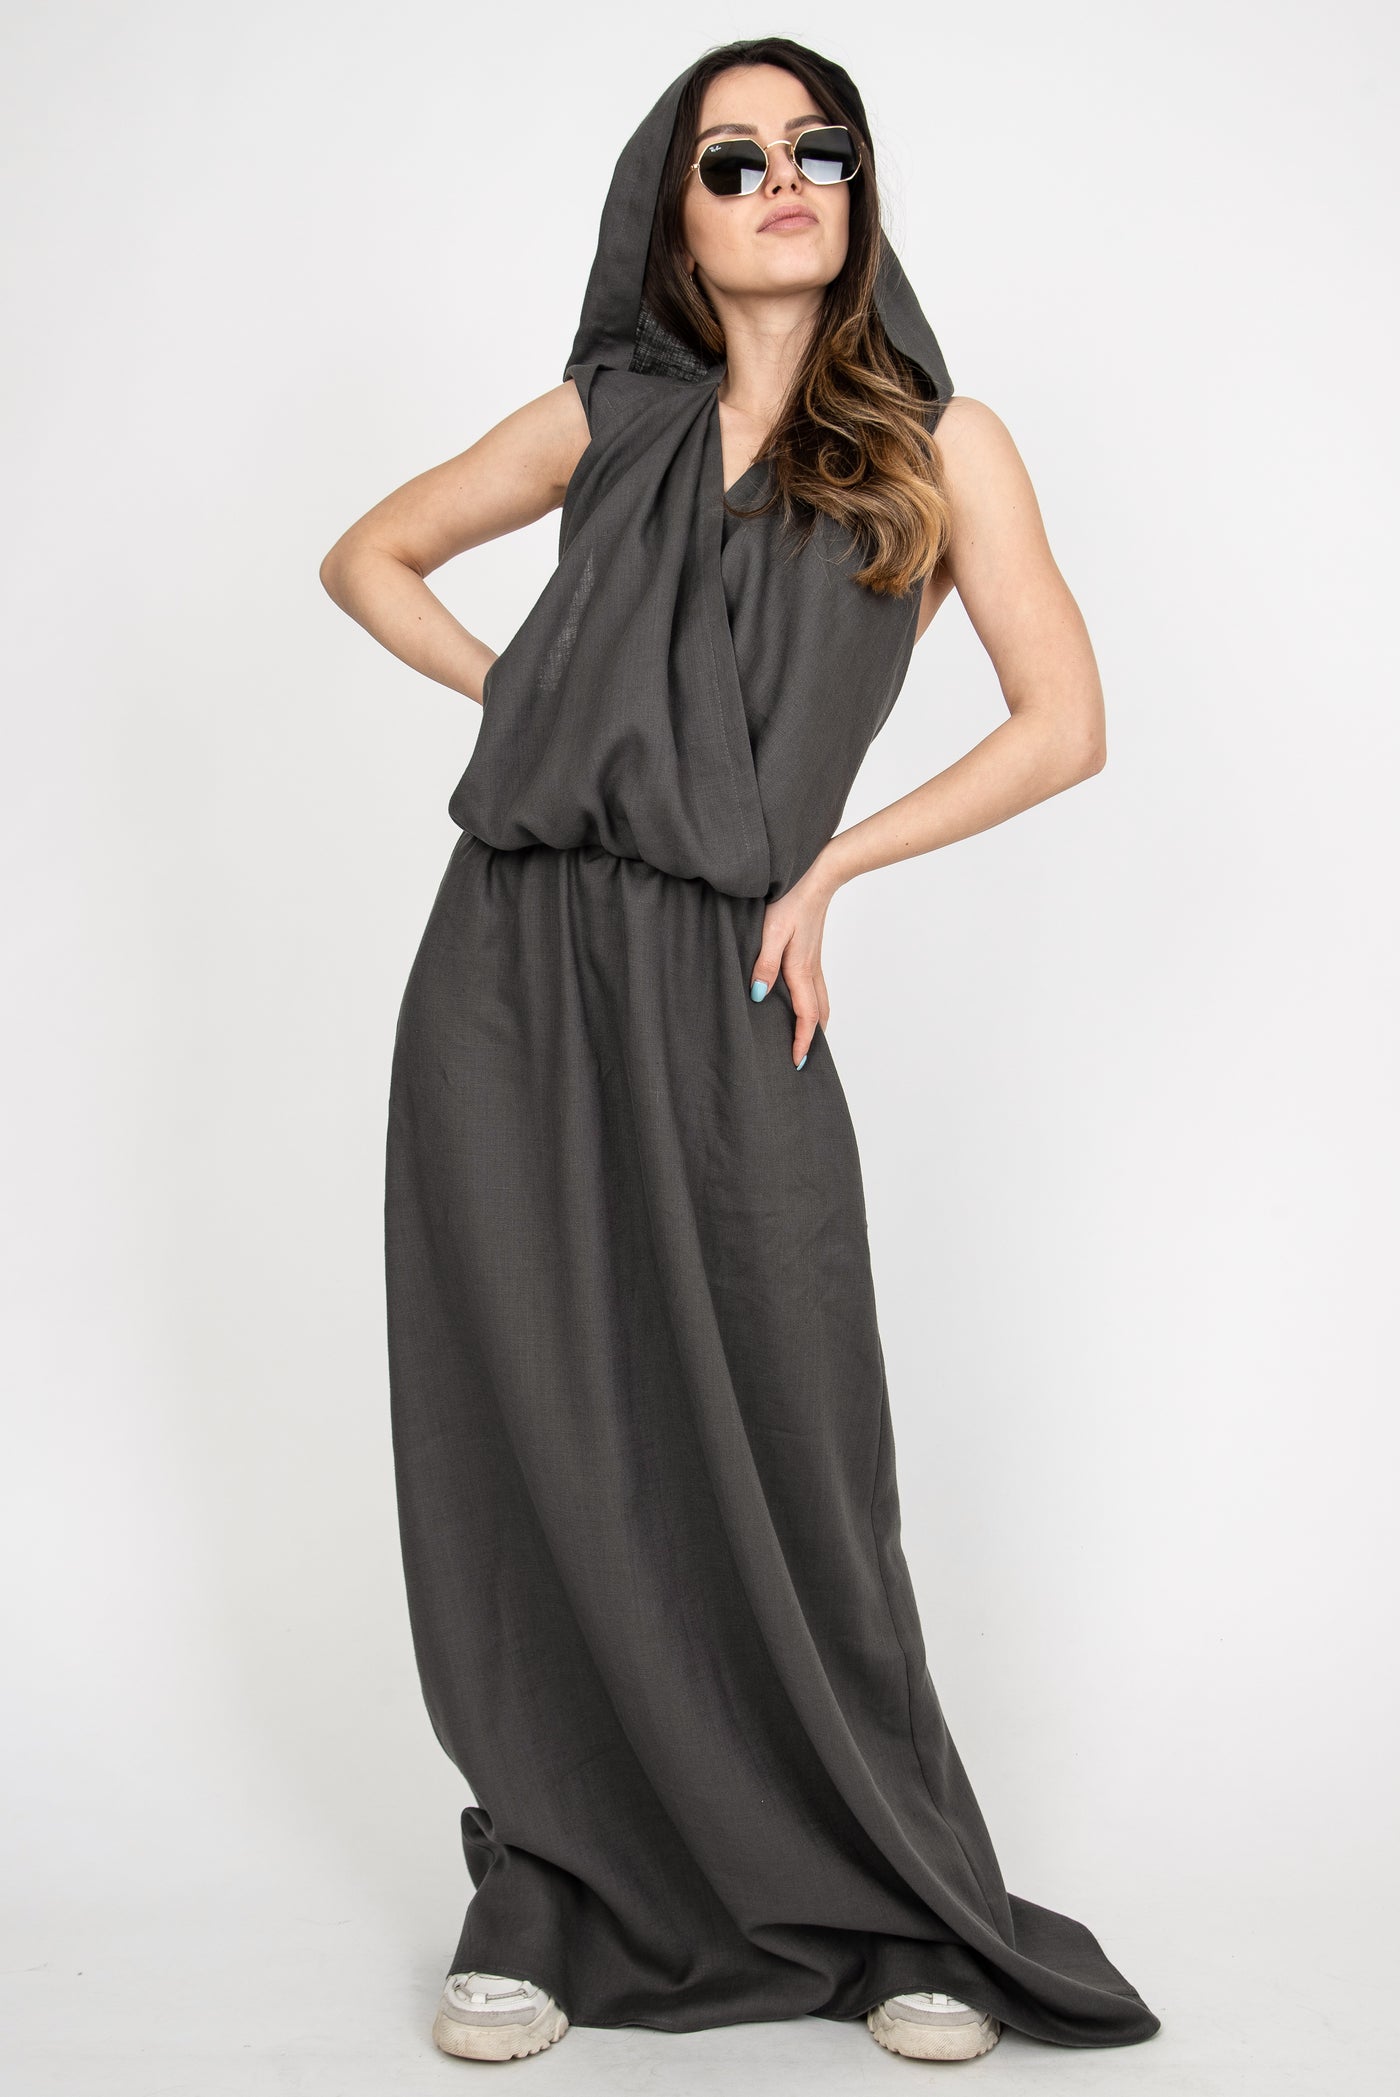 Grey hooded linen dress with open back AE271